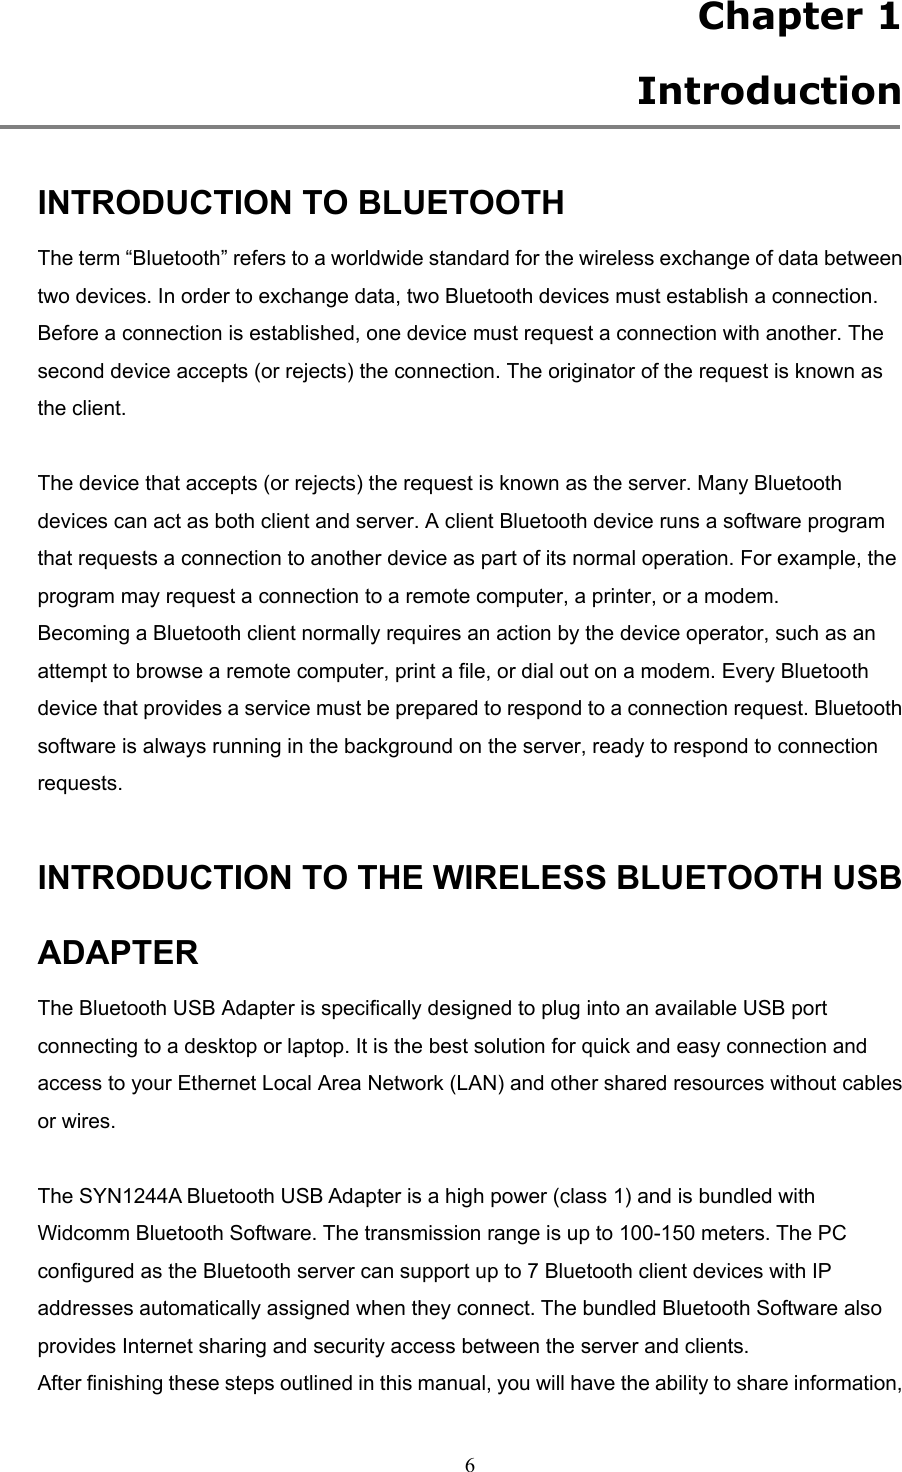  6 Chapter 1   Introduction  INTRODUCTION TO BLUETOOTH The term “Bluetooth” refers to a worldwide standard for the wireless exchange of data between two devices. In order to exchange data, two Bluetooth devices must establish a connection. Before a connection is established, one device must request a connection with another. The second device accepts (or rejects) the connection. The originator of the request is known as the client.  The device that accepts (or rejects) the request is known as the server. Many Bluetooth devices can act as both client and server. A client Bluetooth device runs a software program that requests a connection to another device as part of its normal operation. For example, the program may request a connection to a remote computer, a printer, or a modem. Becoming a Bluetooth client normally requires an action by the device operator, such as an attempt to browse a remote computer, print a file, or dial out on a modem. Every Bluetooth device that provides a service must be prepared to respond to a connection request. Bluetooth software is always running in the background on the server, ready to respond to connection requests.  INTRODUCTION TO THE WIRELESS BLUETOOTH USB ADAPTER The Bluetooth USB Adapter is specifically designed to plug into an available USB port connecting to a desktop or laptop. It is the best solution for quick and easy connection and access to your Ethernet Local Area Network (LAN) and other shared resources without cables or wires.    The SYN1244A Bluetooth USB Adapter is a high power (class 1) and is bundled with Widcomm Bluetooth Software. The transmission range is up to 100-150 meters. The PC configured as the Bluetooth server can support up to 7 Bluetooth client devices with IP addresses automatically assigned when they connect. The bundled Bluetooth Software also provides Internet sharing and security access between the server and clients.   After finishing these steps outlined in this manual, you will have the ability to share information, 